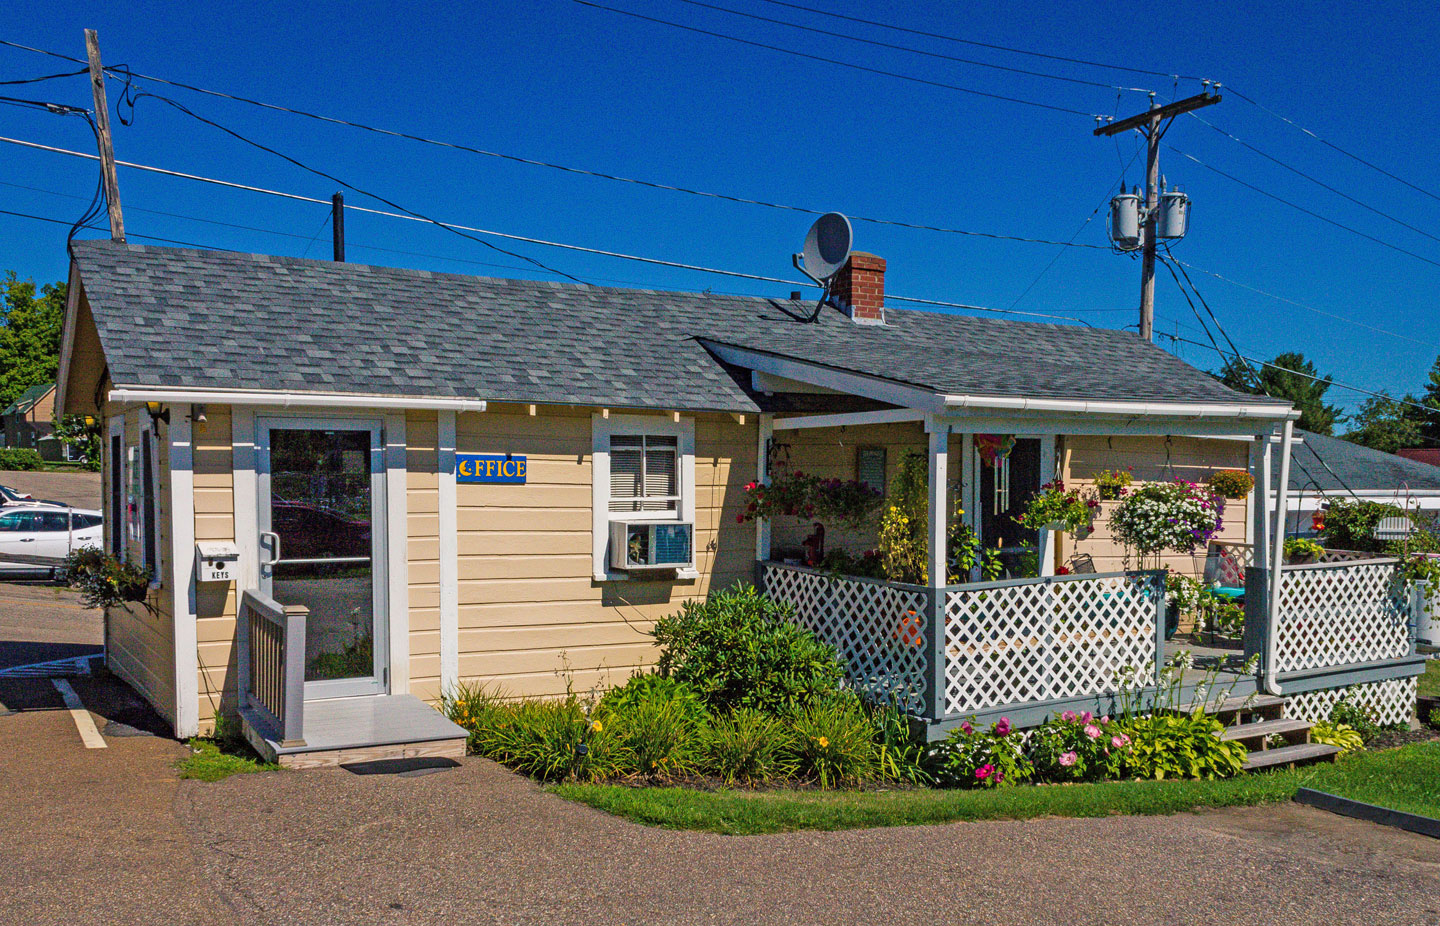 Contact Us Half Moon Motel Cottages Weirs Beach Laconia